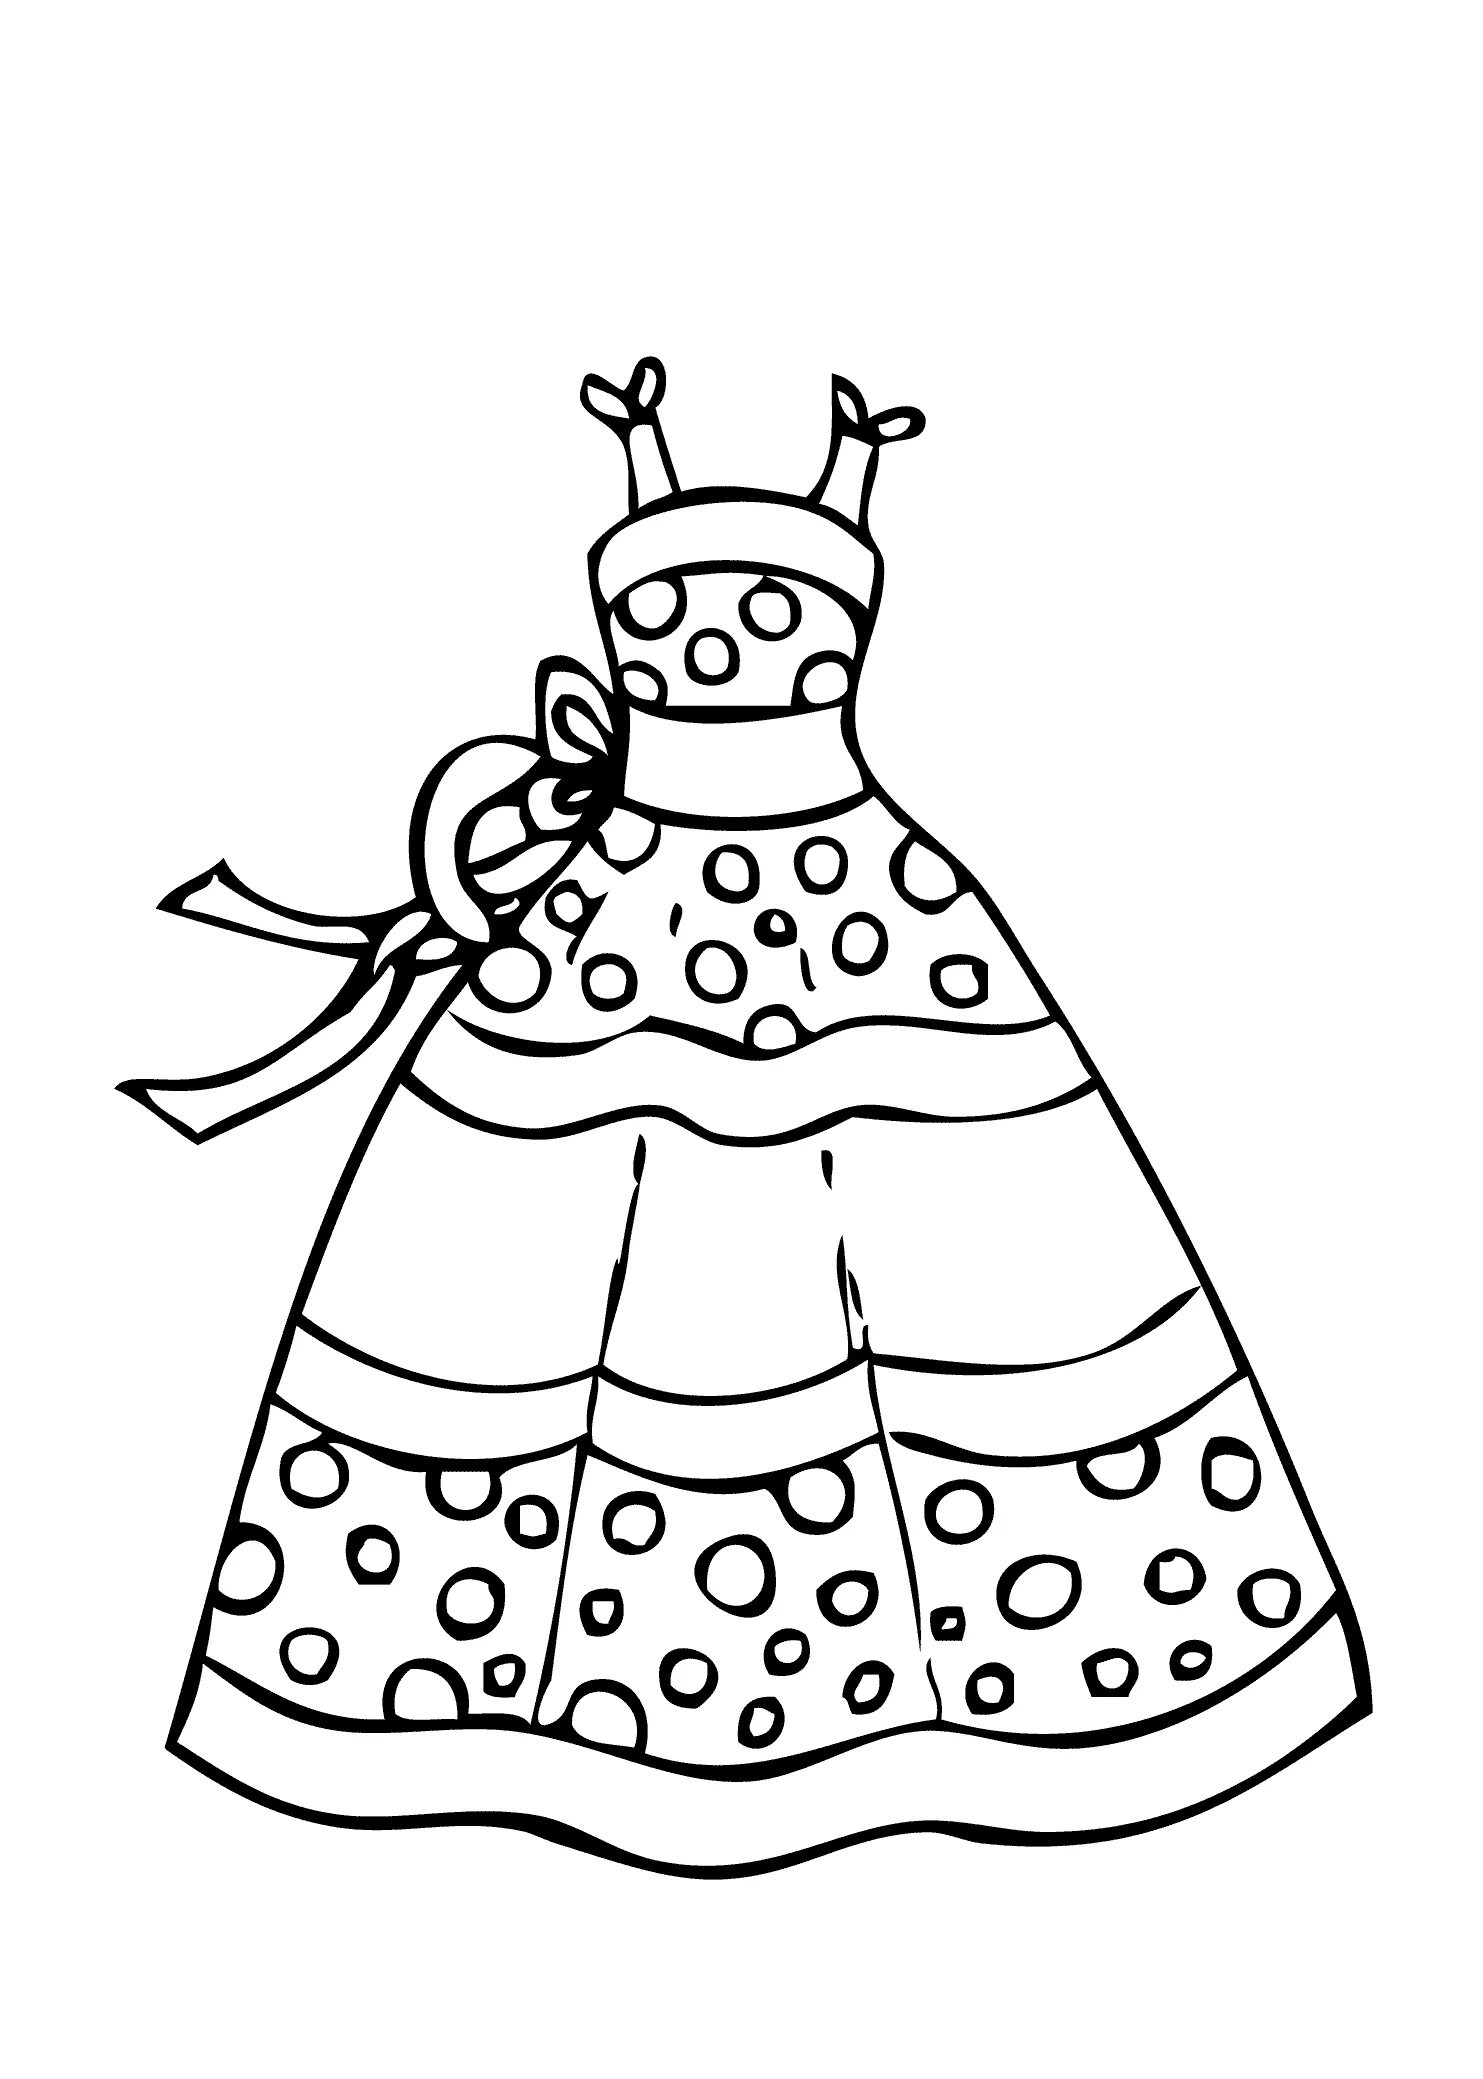 Coloring page holiday sundress for children